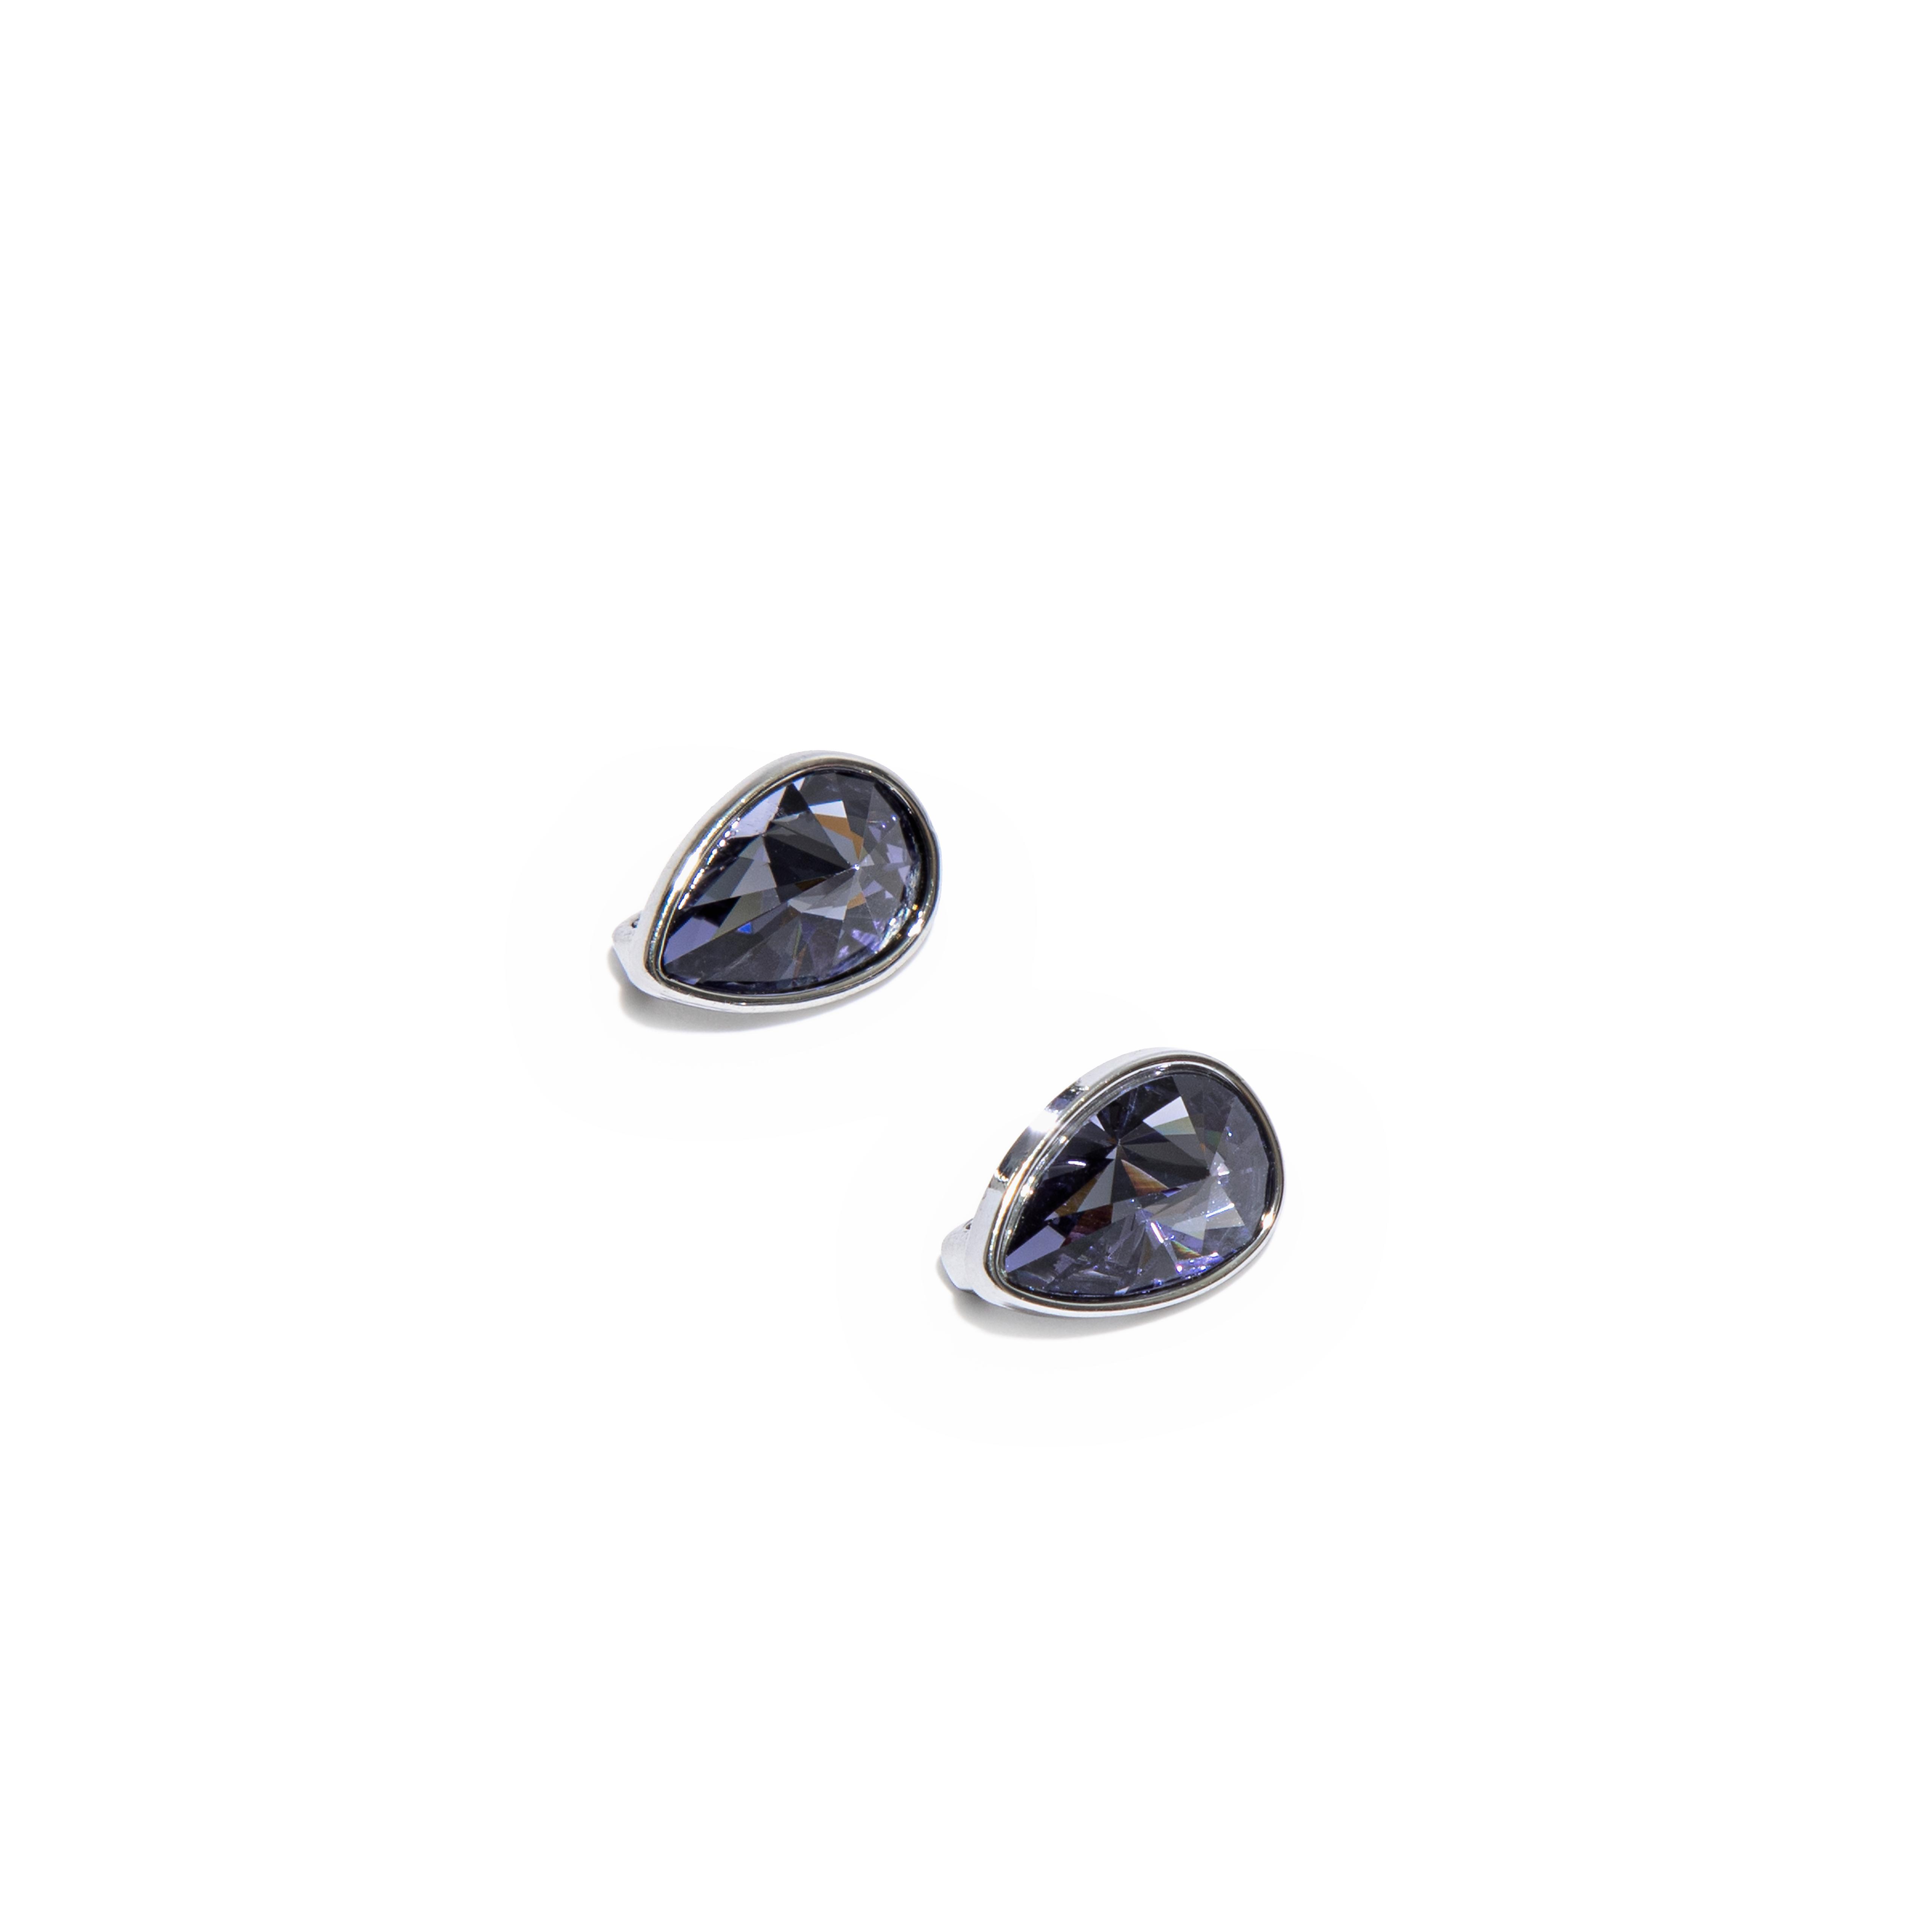 Fitflop iQUSHION CHARMS Crystal Teardrop Charms 2-Pack